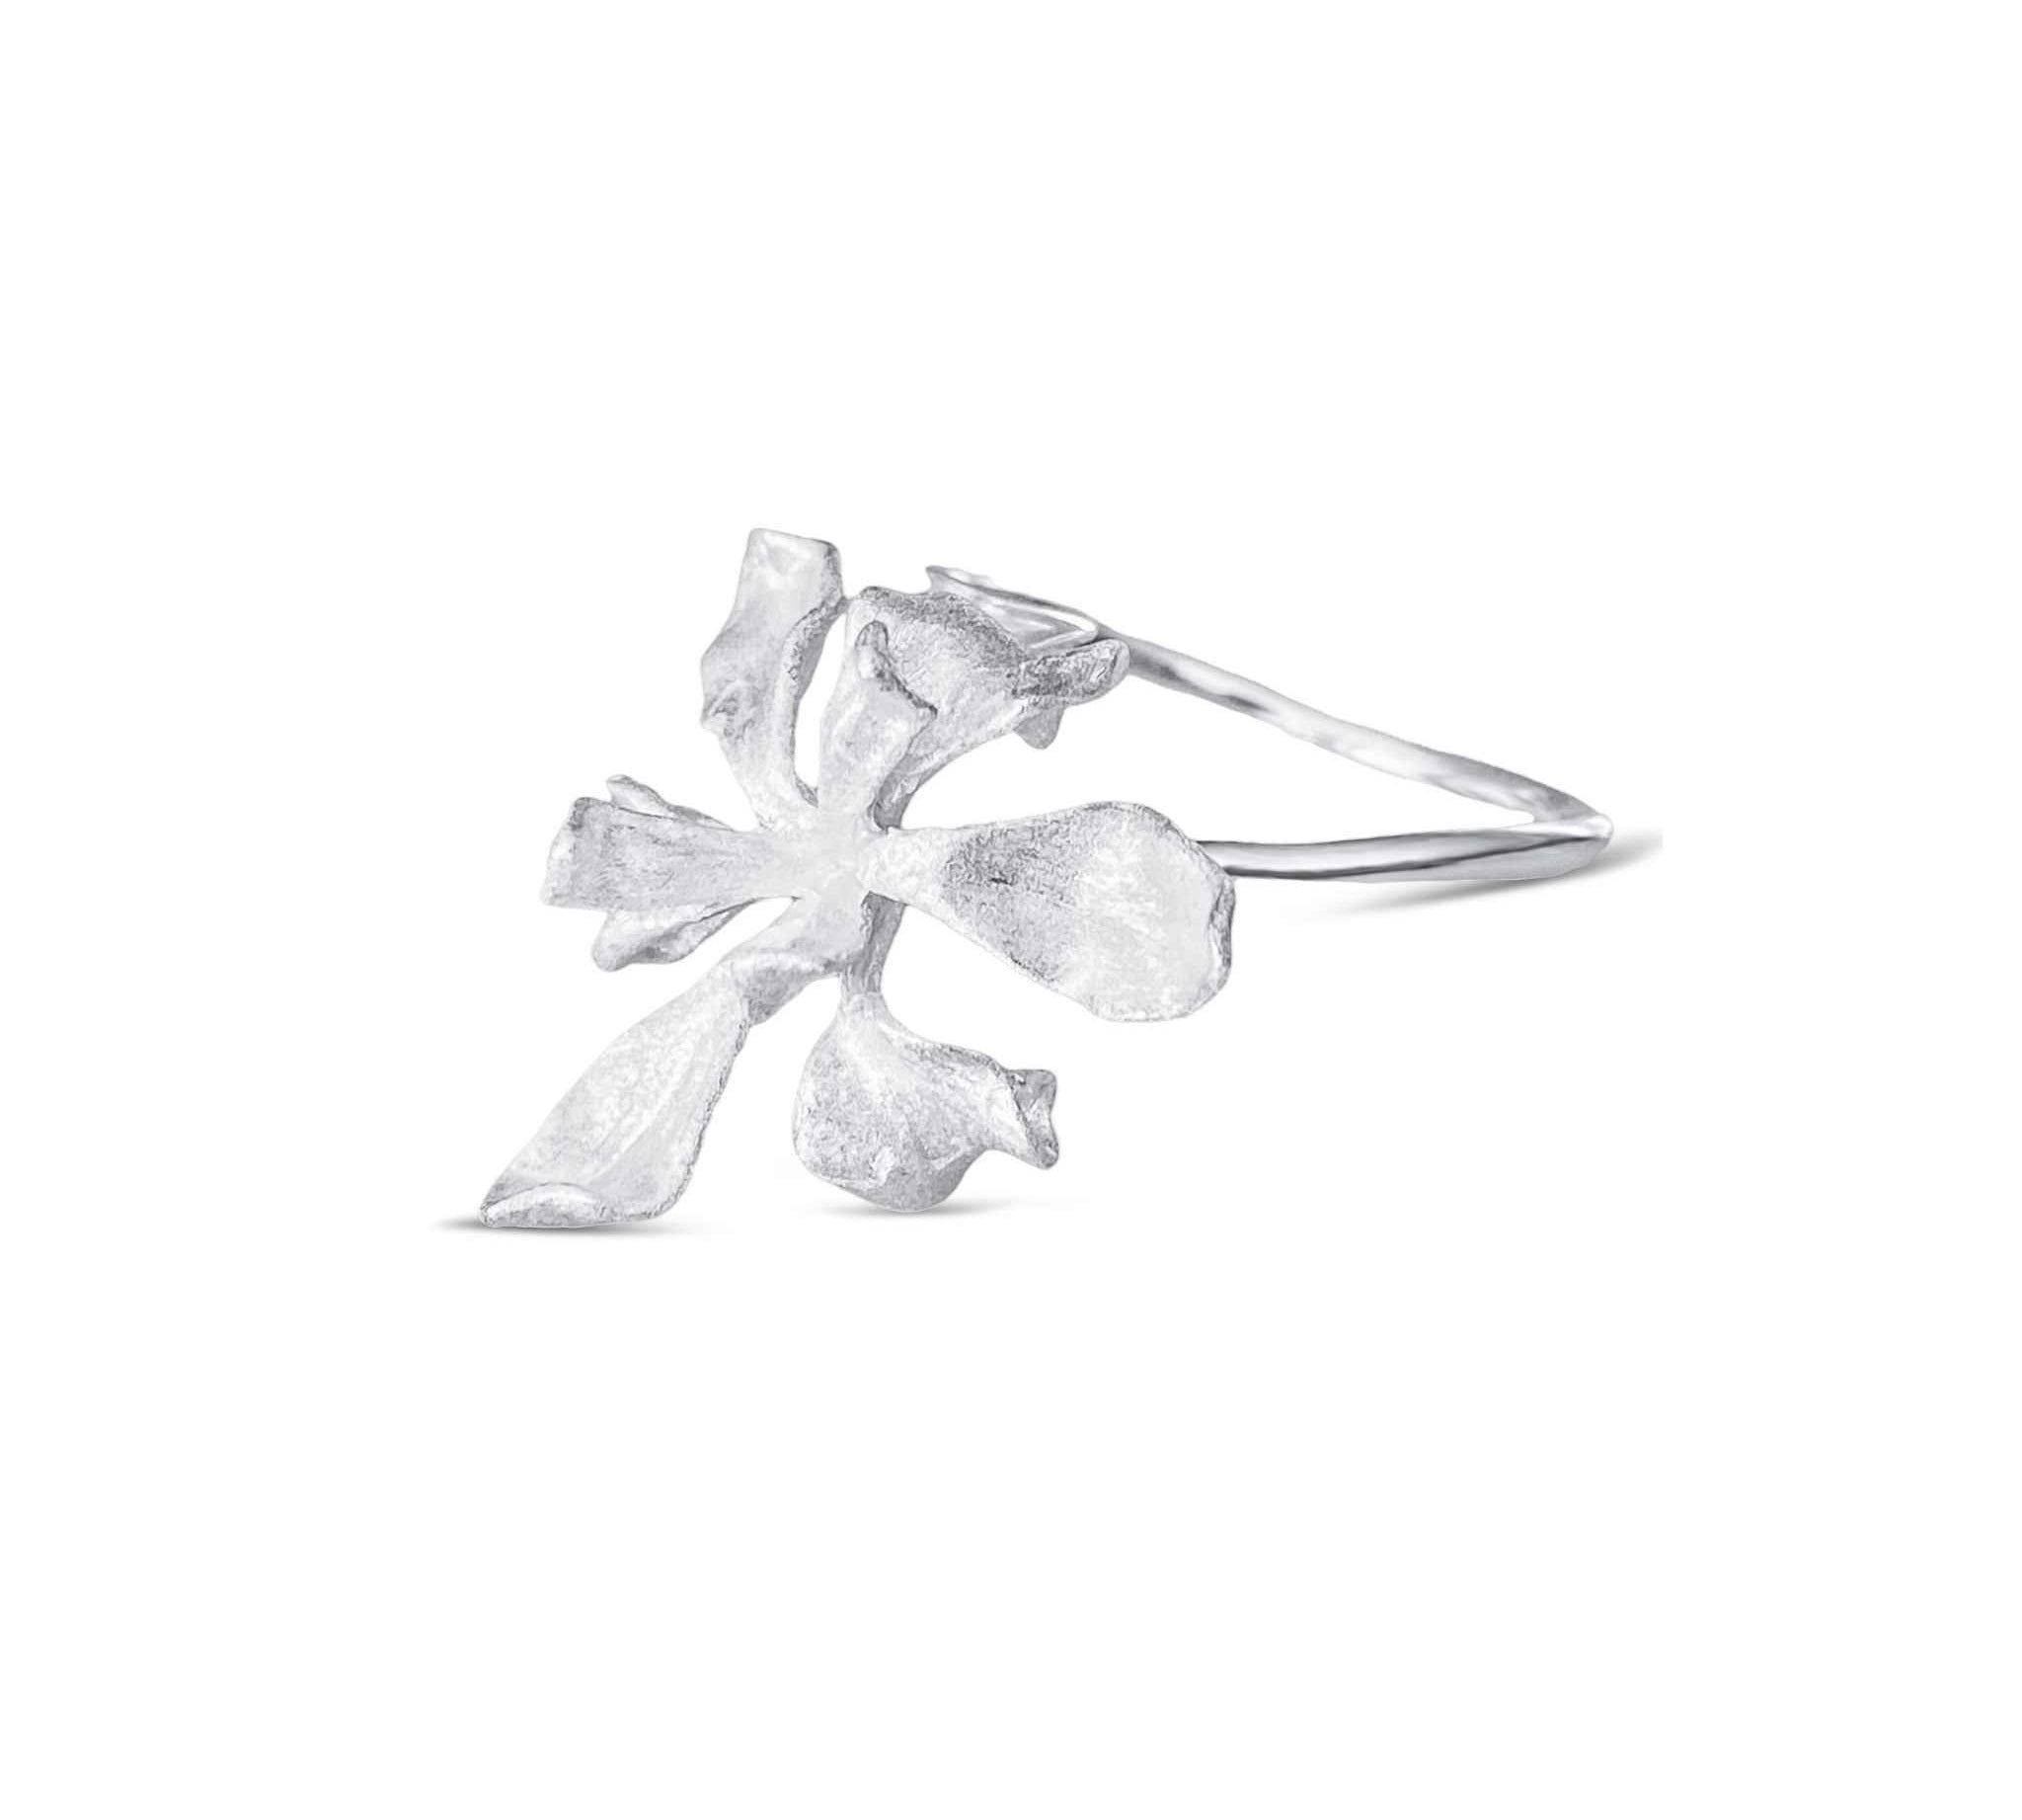 Elegant sterling silver Iris Cocktail Ring showcasing intricate detailing - a perfect representation of refined taste.